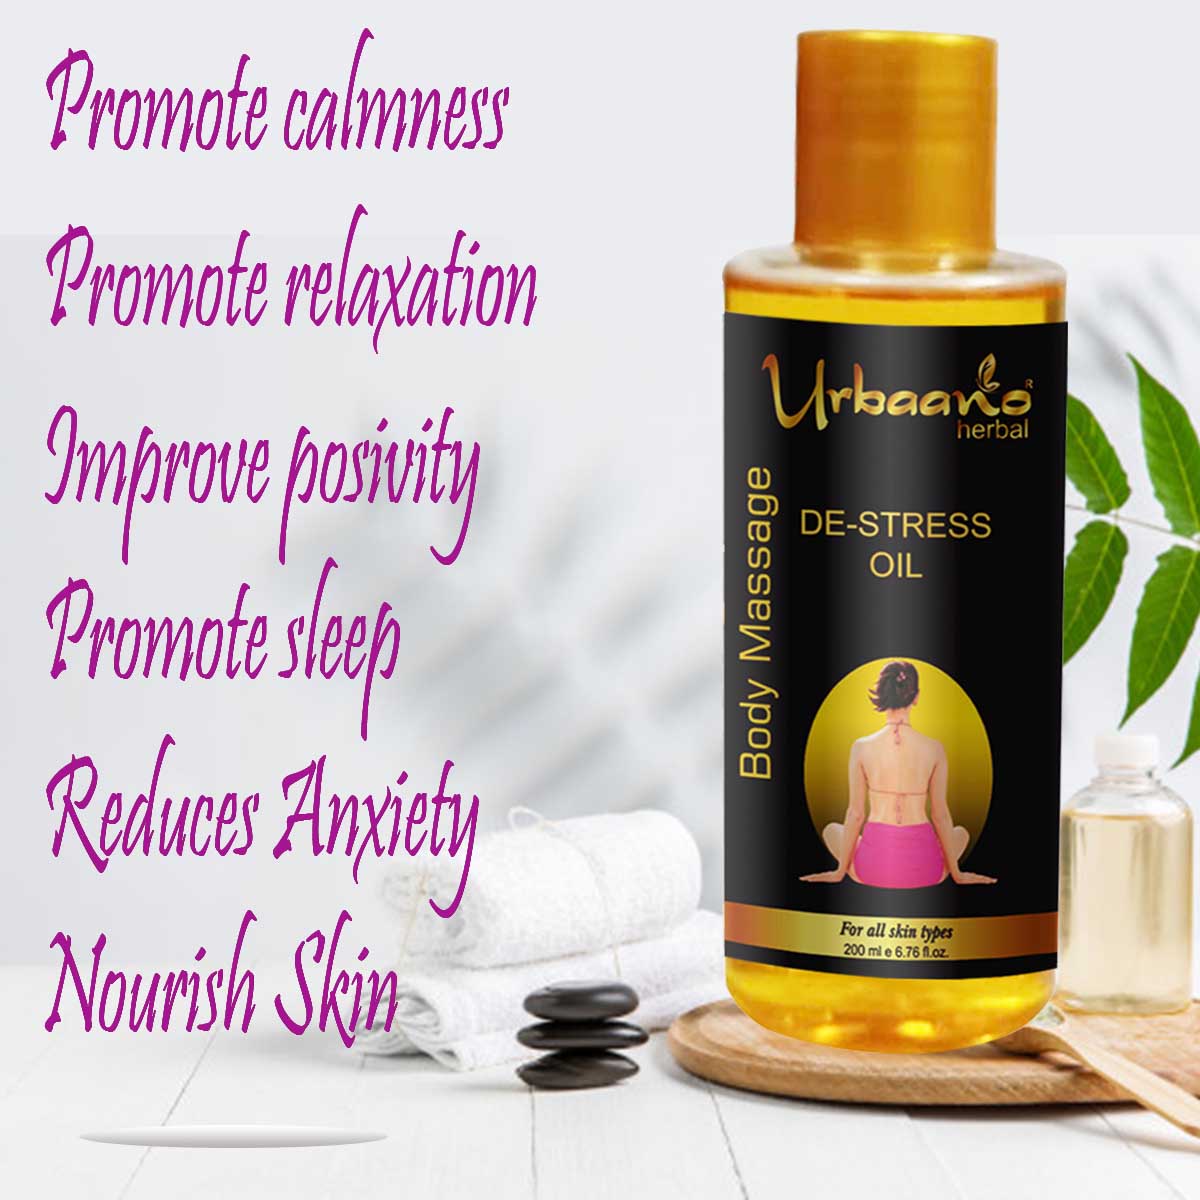 urbaano herbal de stress body massage oil promotes calmness, relaxation, positivity. reduces anxiety